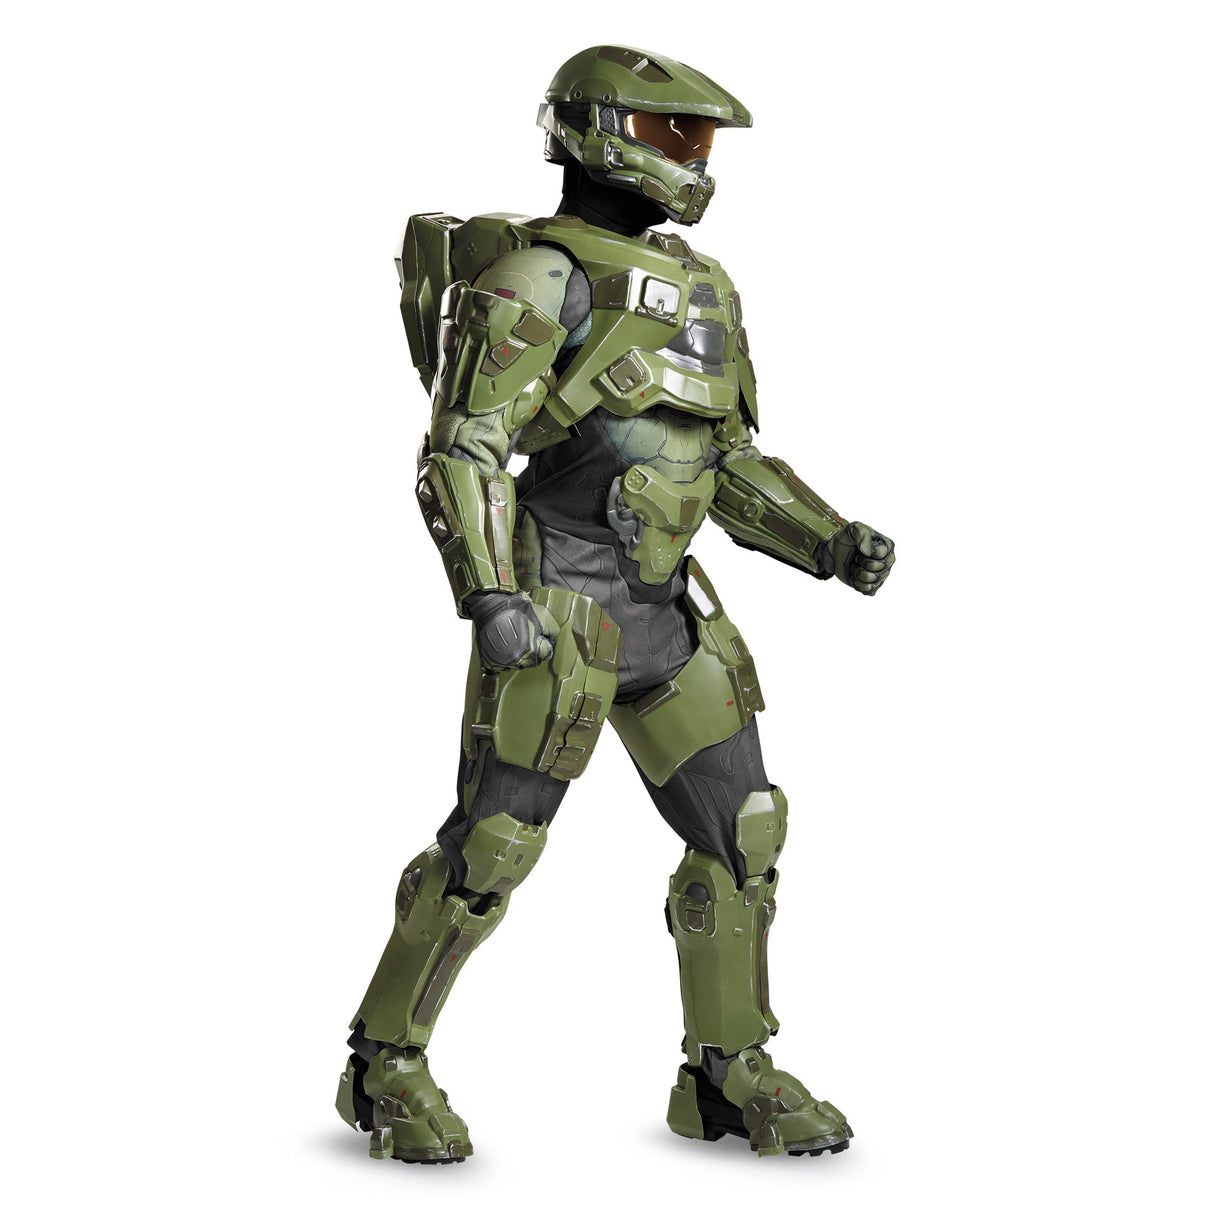 DISGUISE (TOY-SPORT) Costumes Halo Master Chief Ultra Prestige Costume for Adults